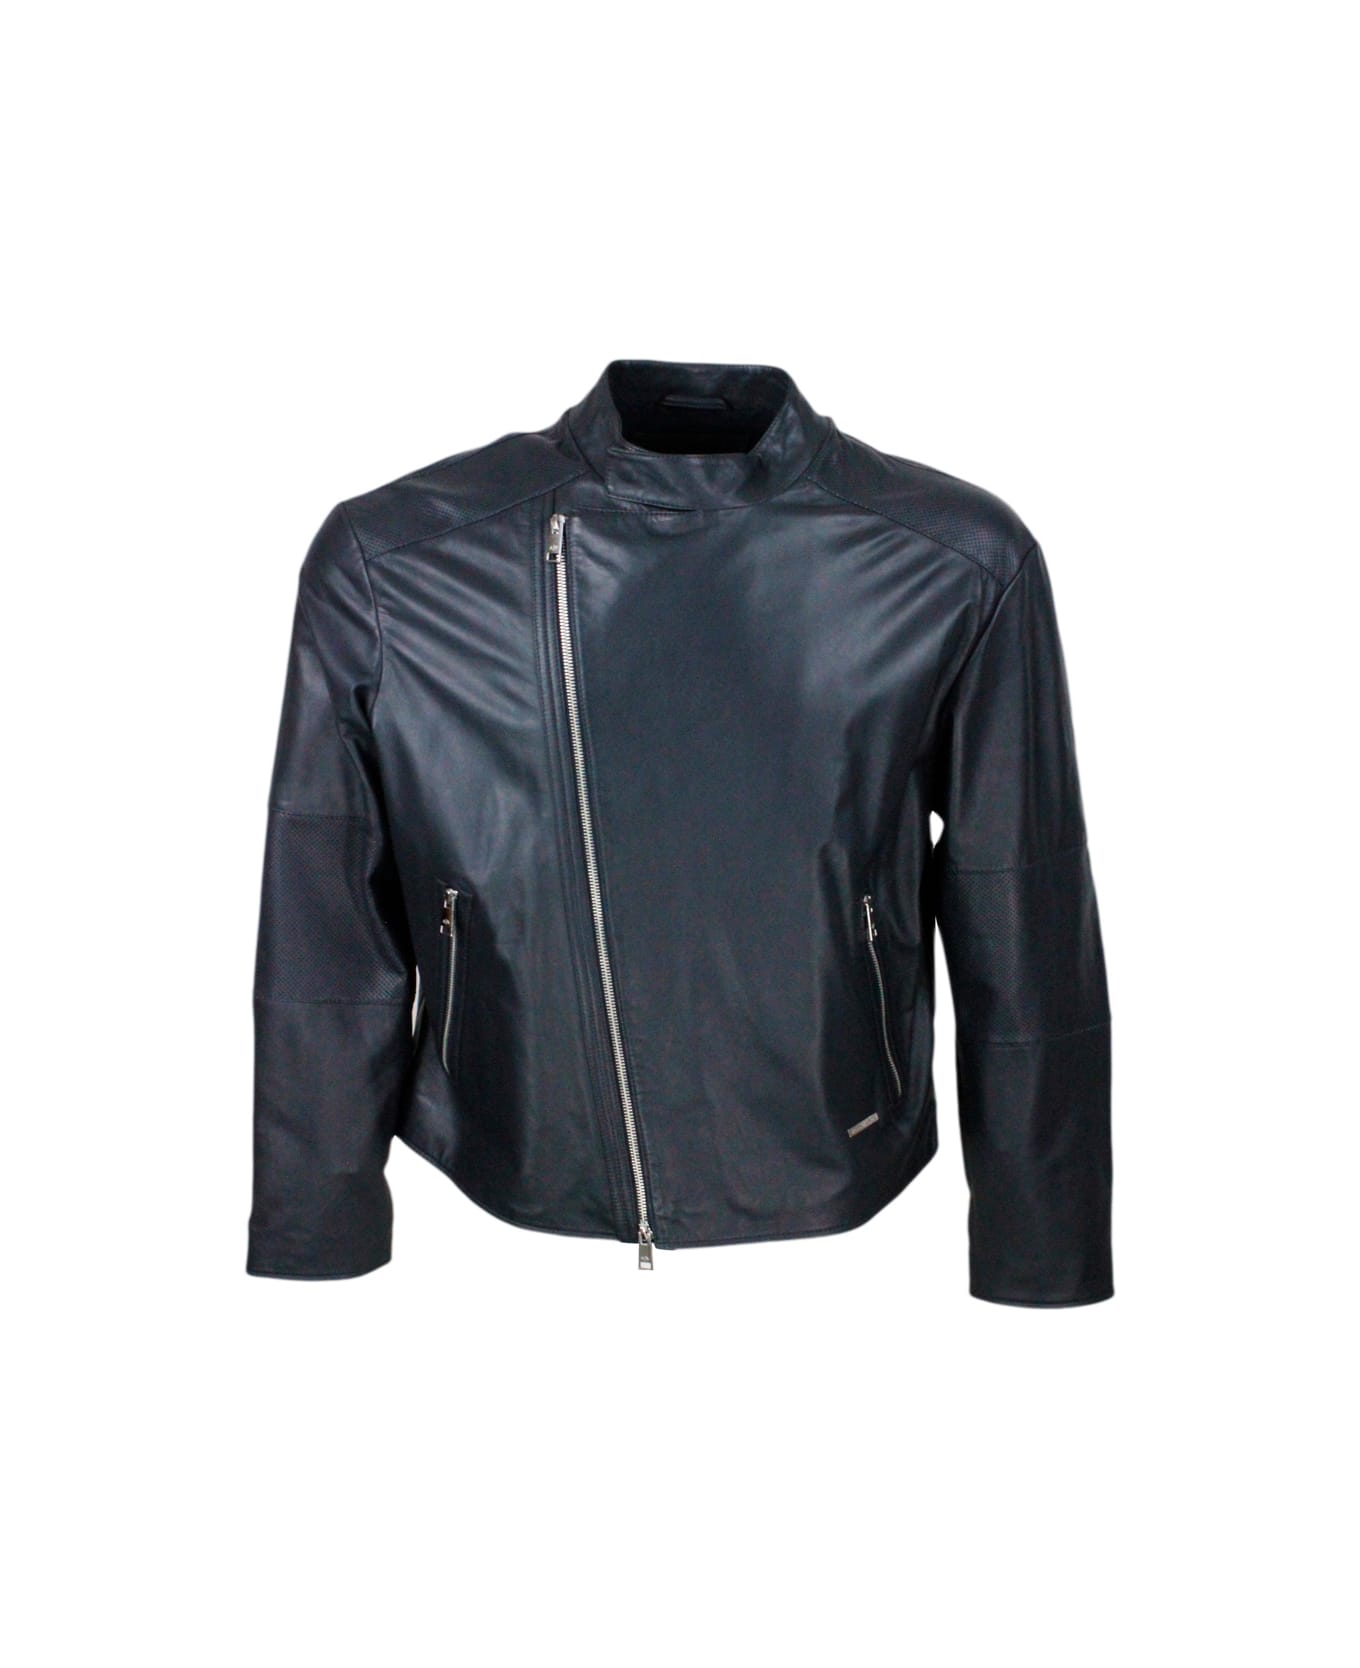 Armani Collezioni Jacket With Zip Closure Made Of Soft Lambskin With Perforated Leather Details. Zip On Pockets And Cuffs - Blu